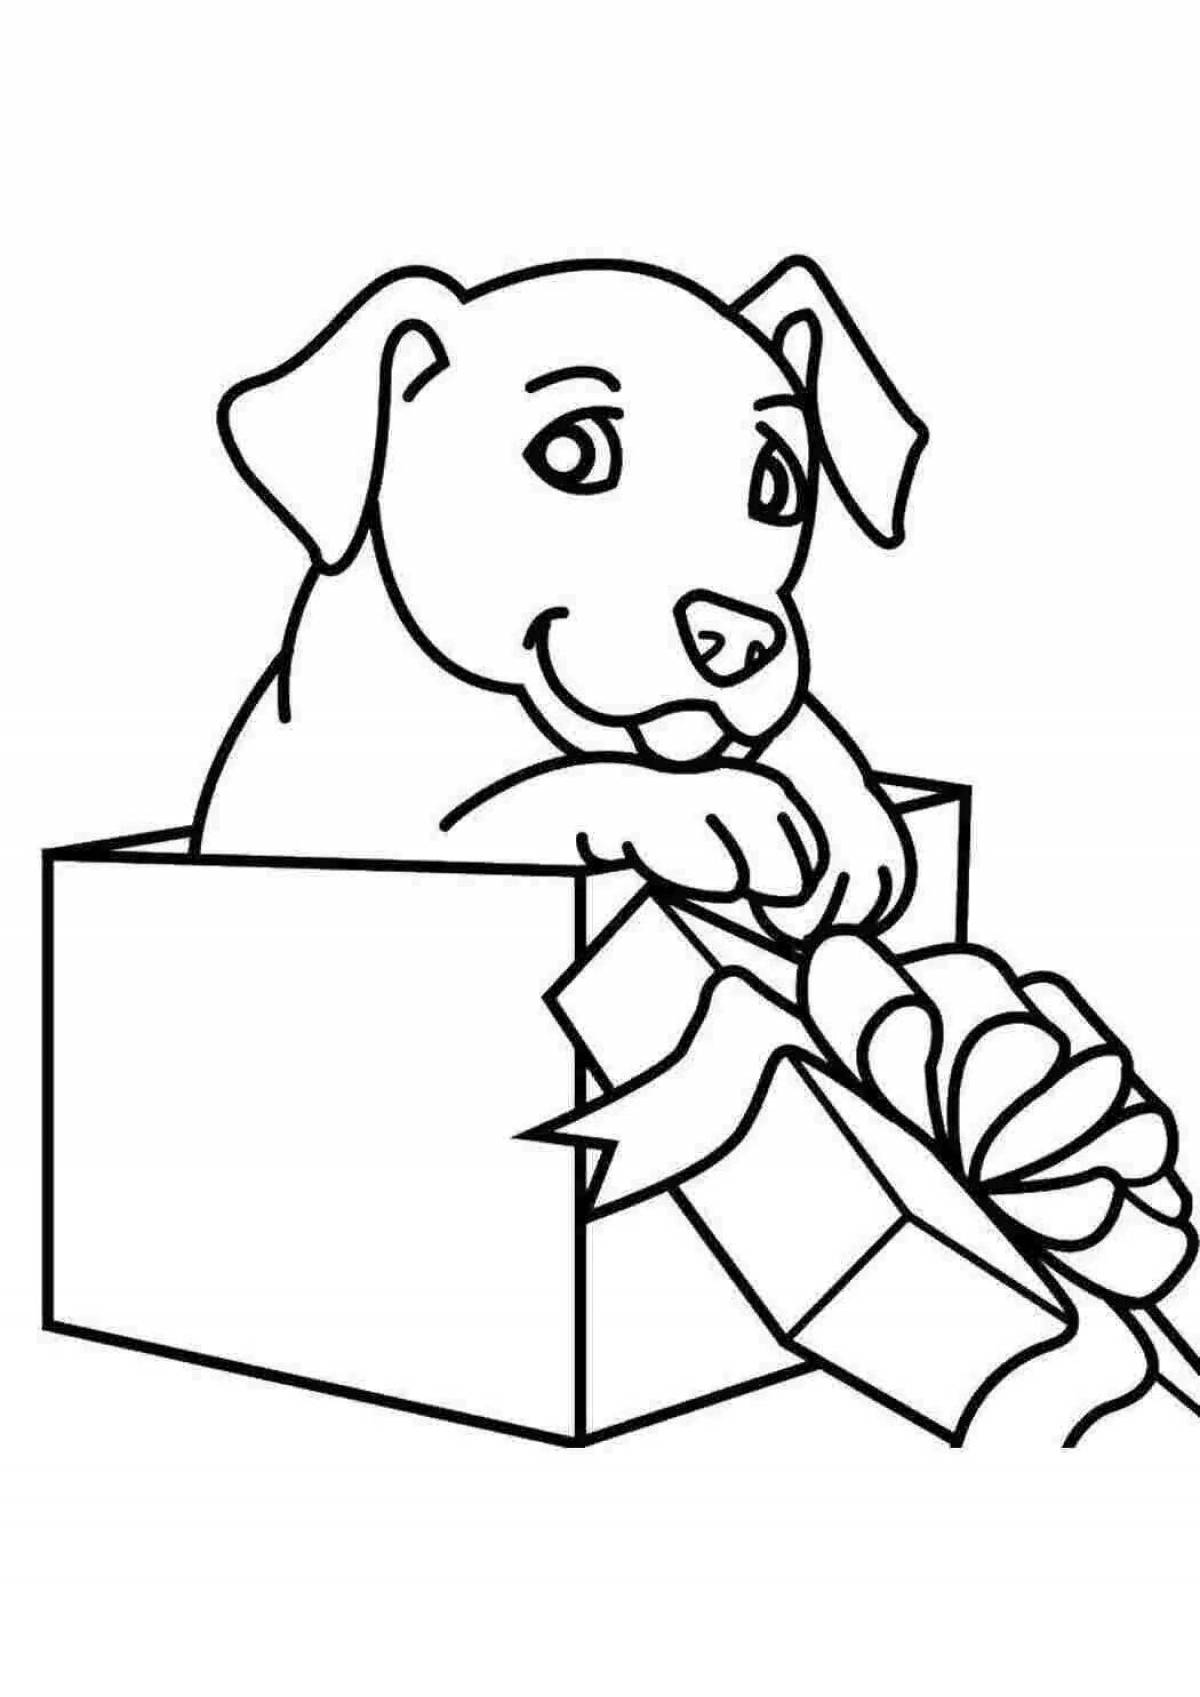 Coloring page cozy cat in a box